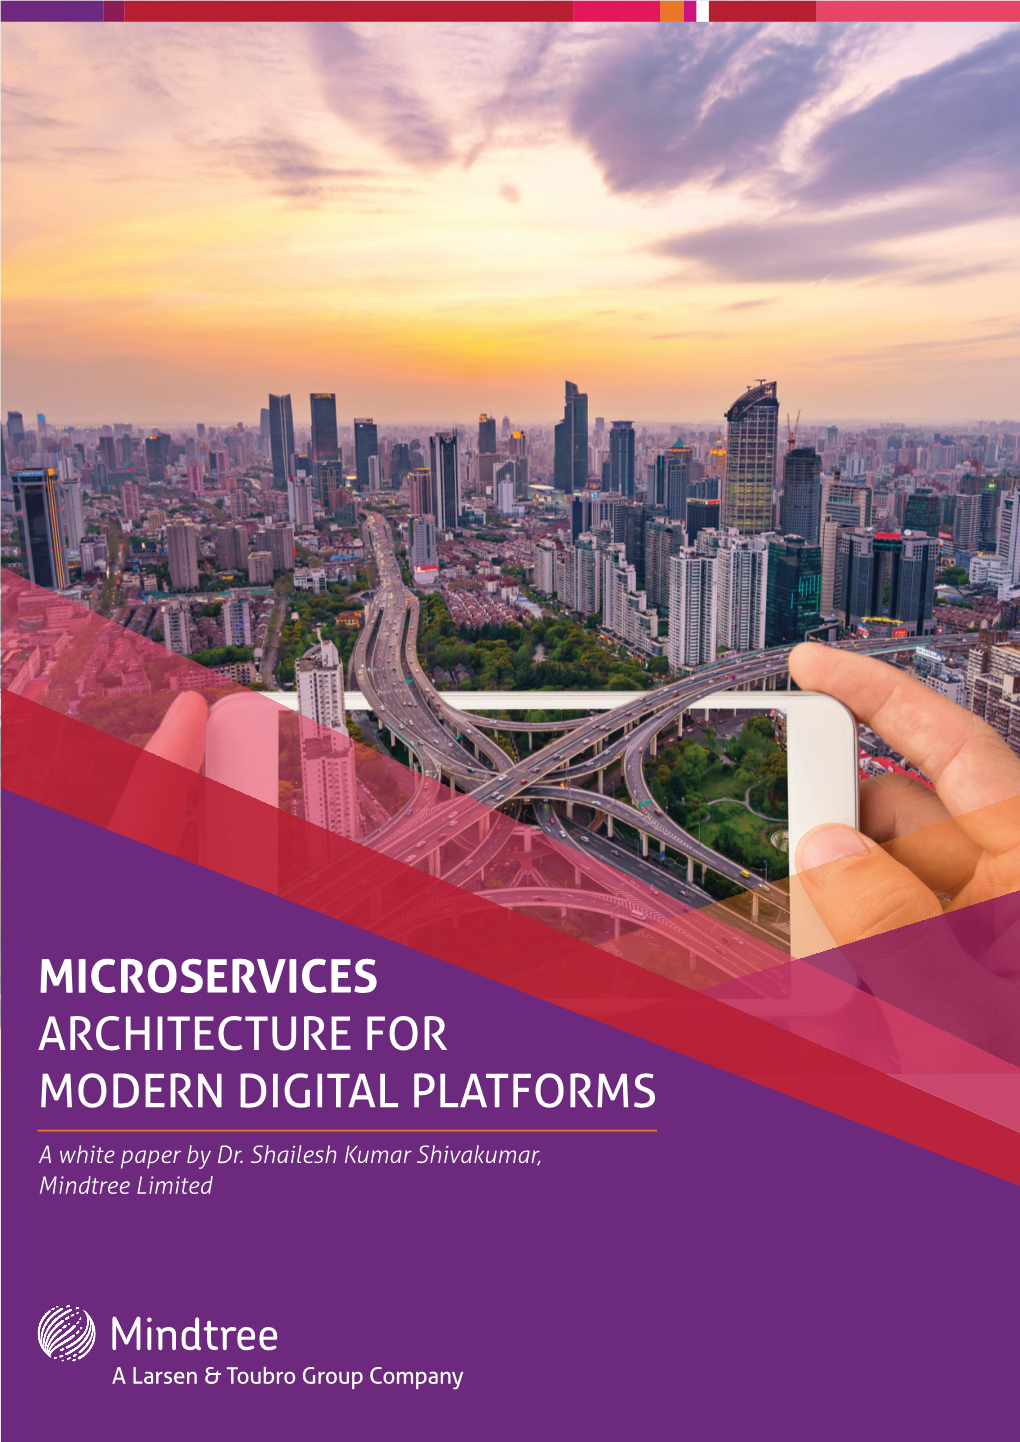 Microservices Architecture for Modern Digital Platforms